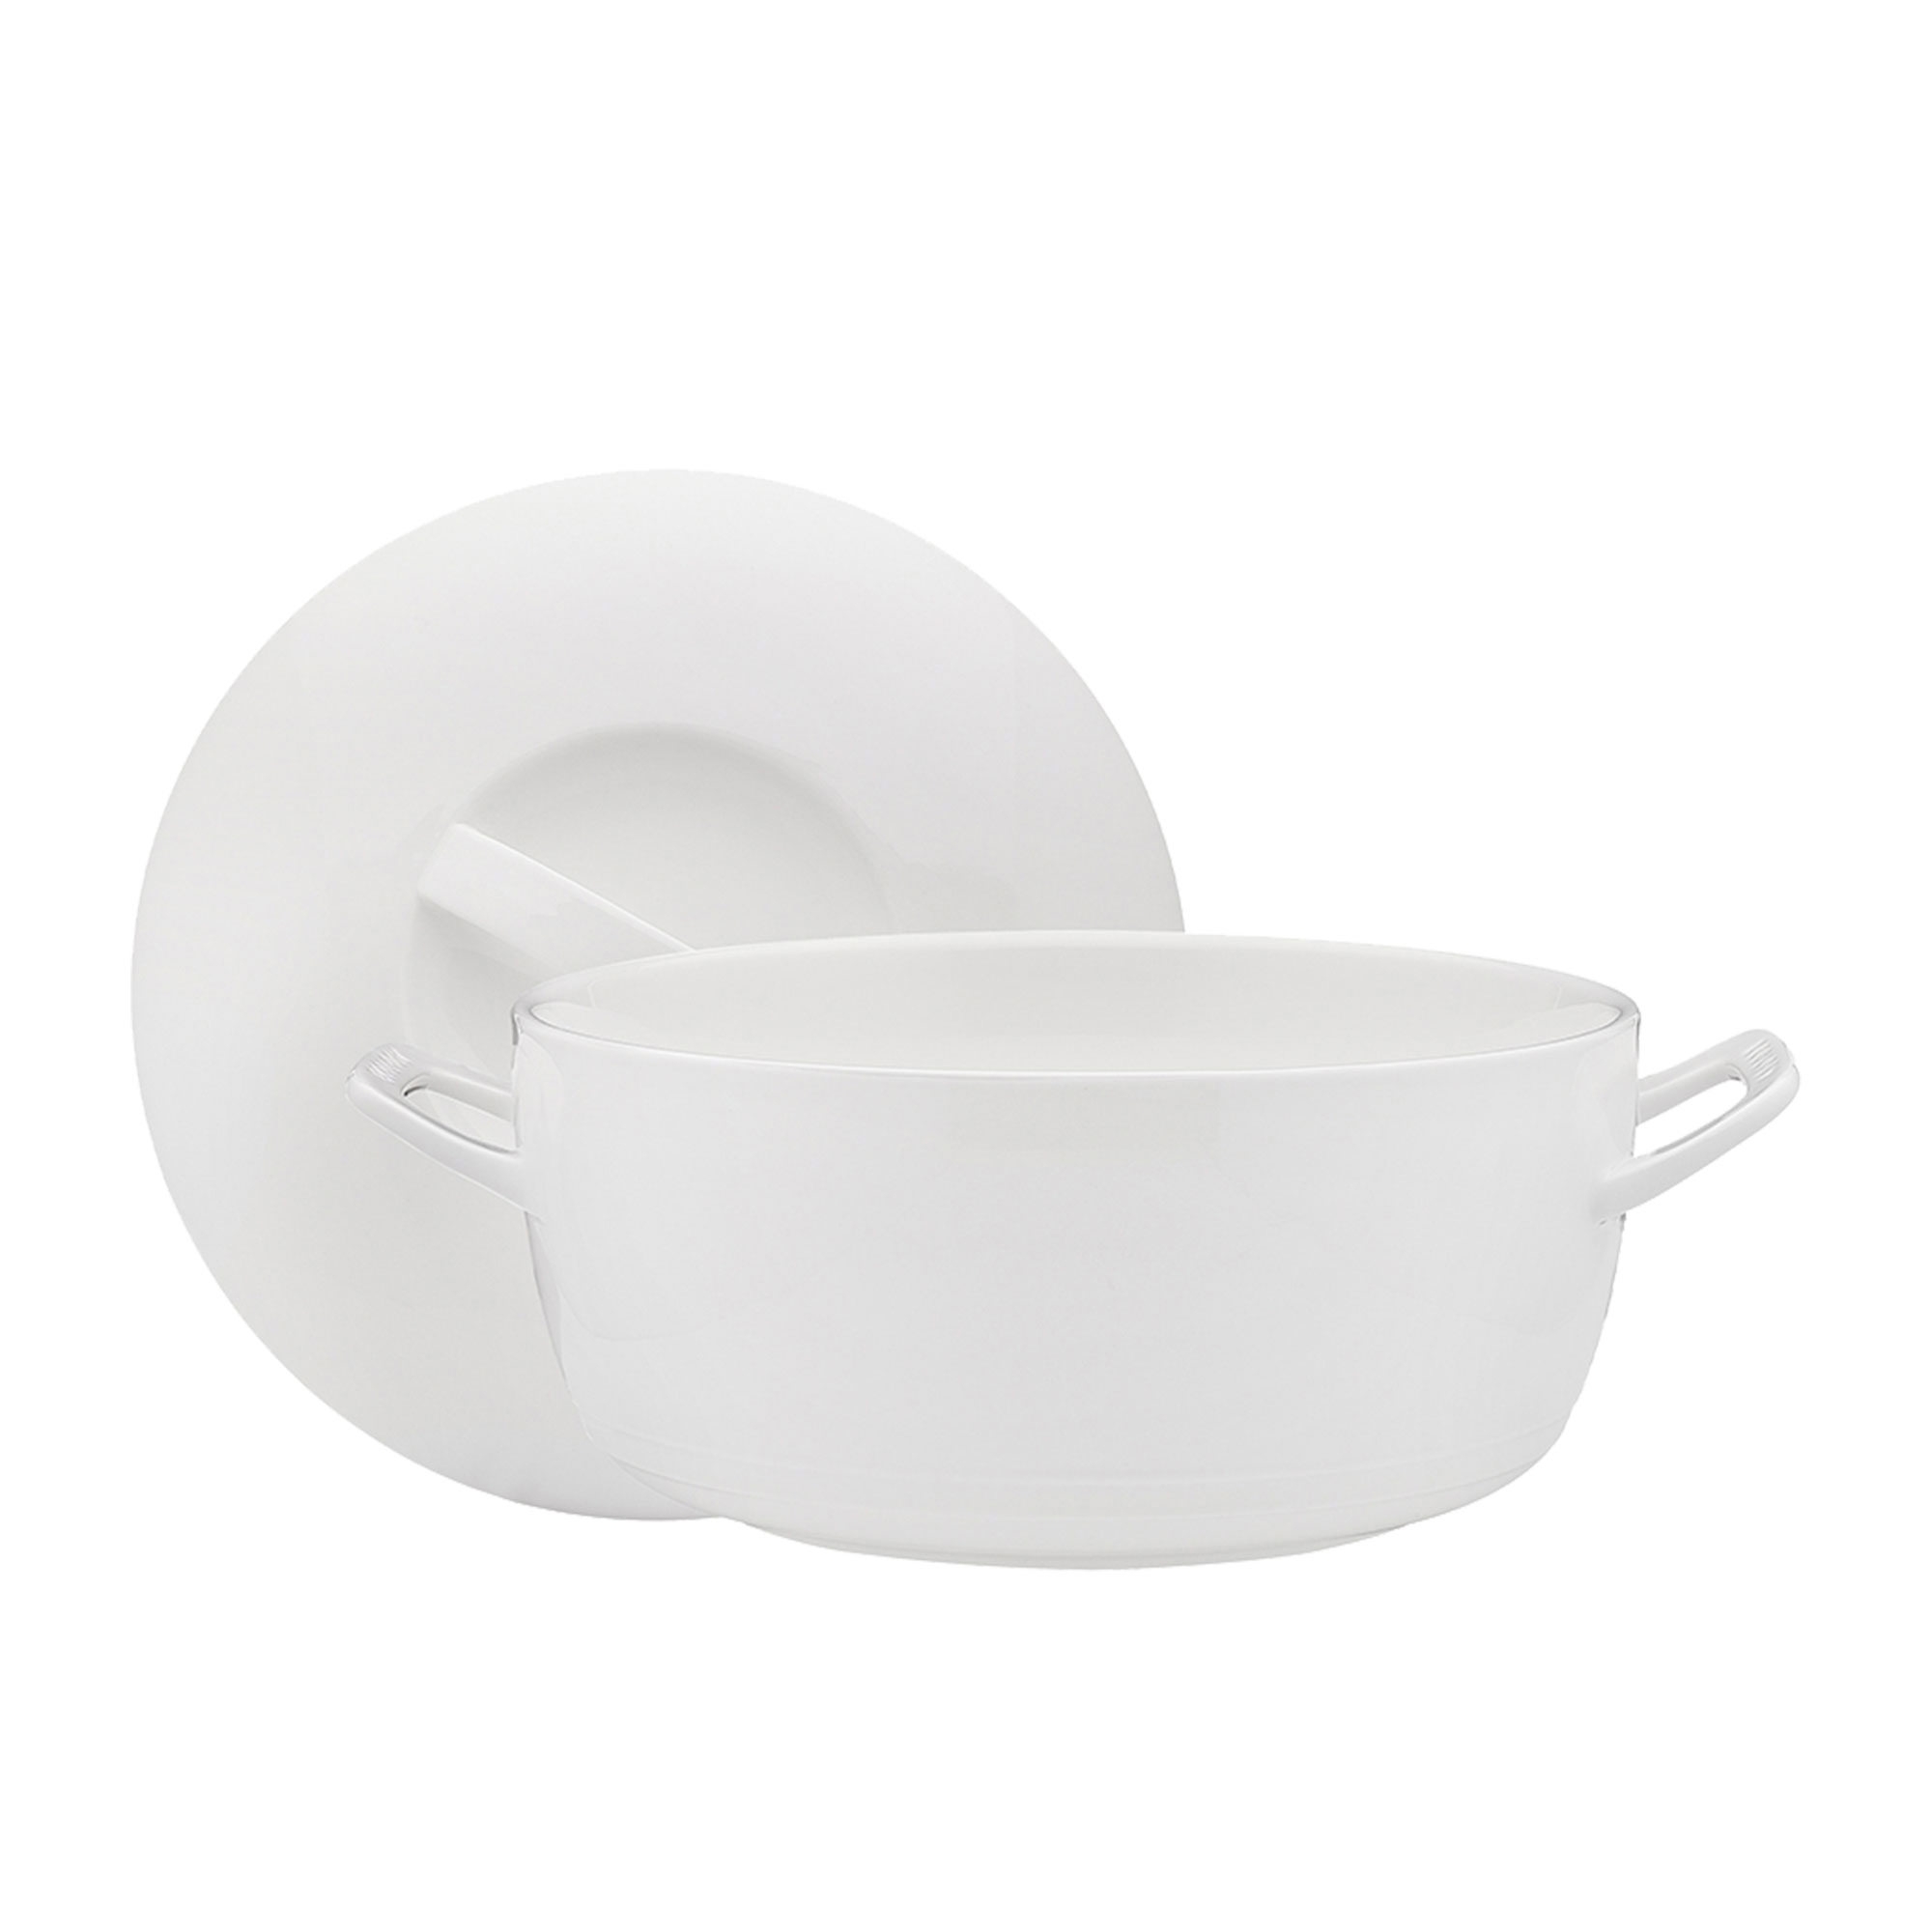 Ecology Signature Casserole with Lid 3.5L White Image 2